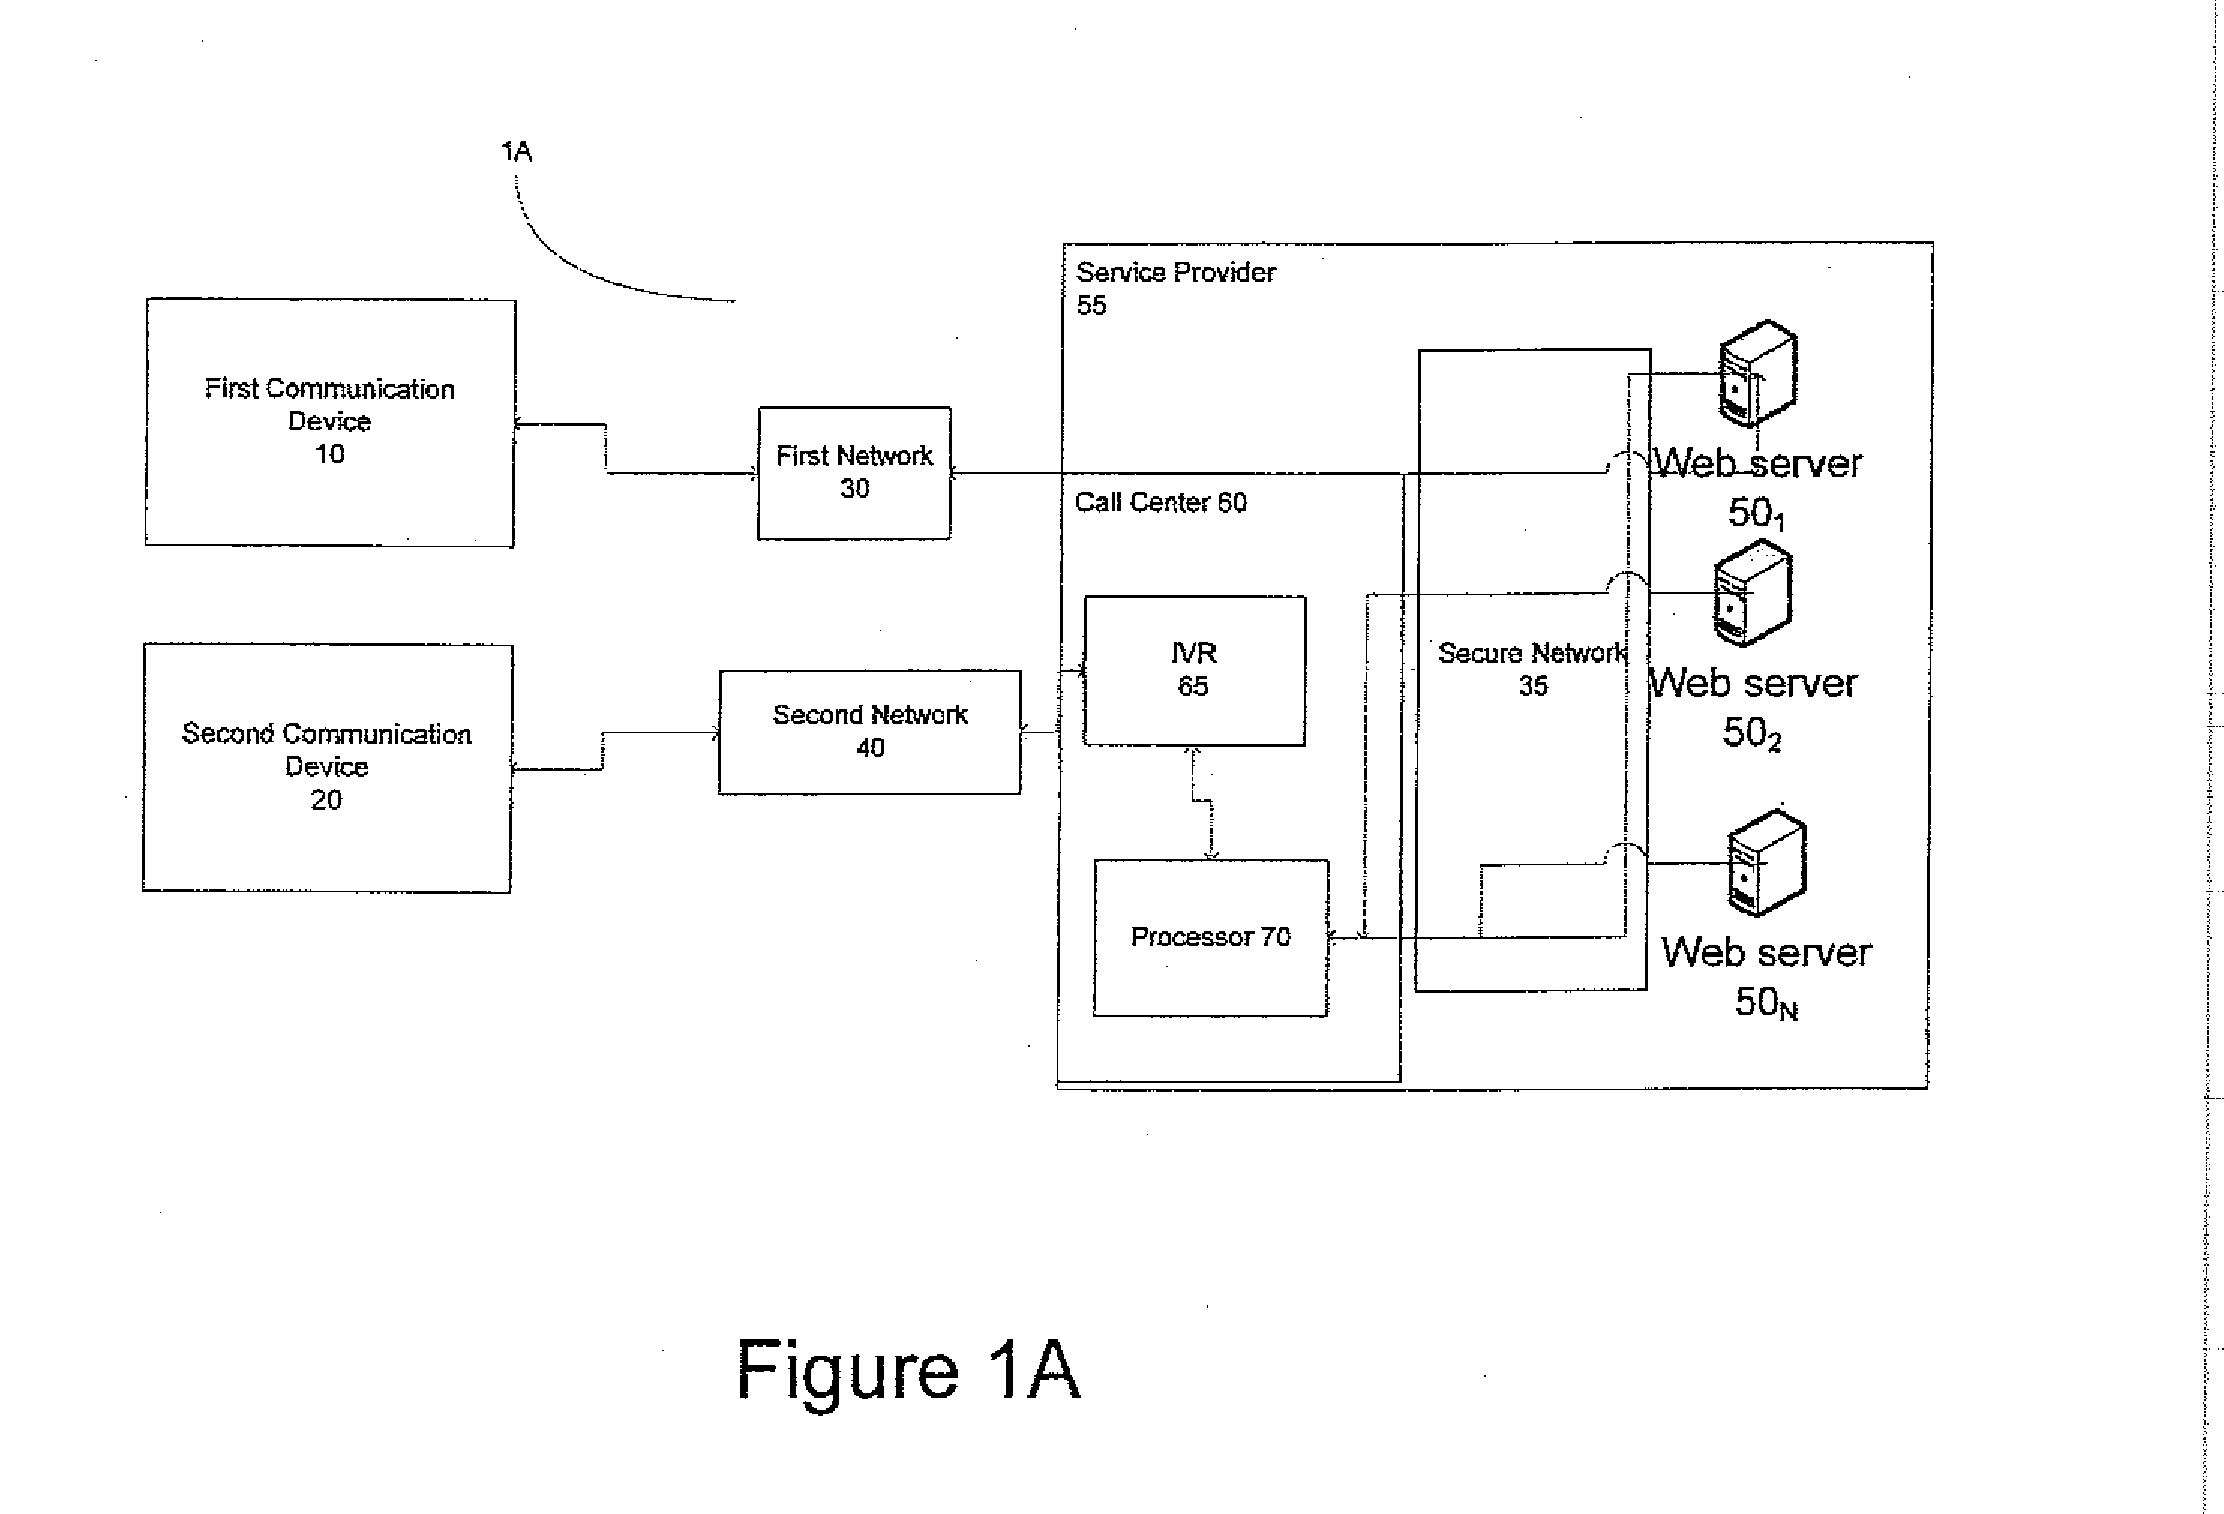 Method, system and program for verifying the authenticity of a website using a reliable telecommunication channel and pre-login message